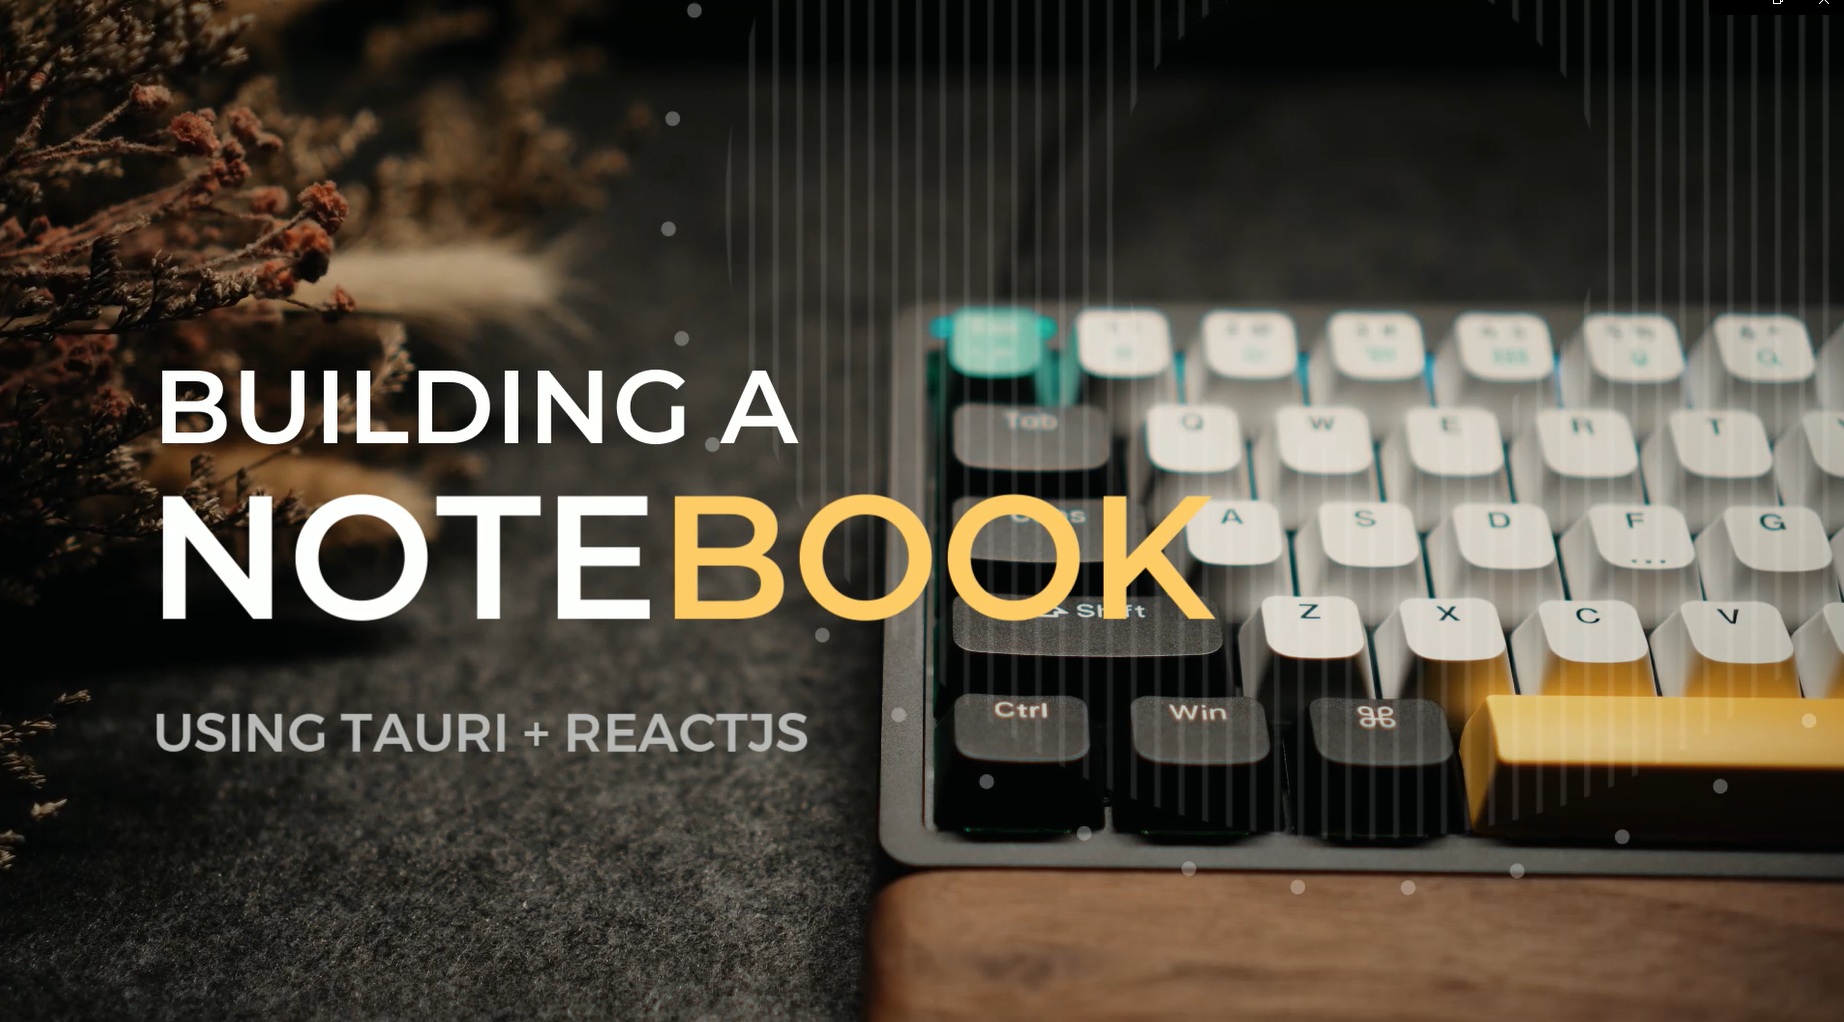 Building a notebook using Tauri and ReactJS